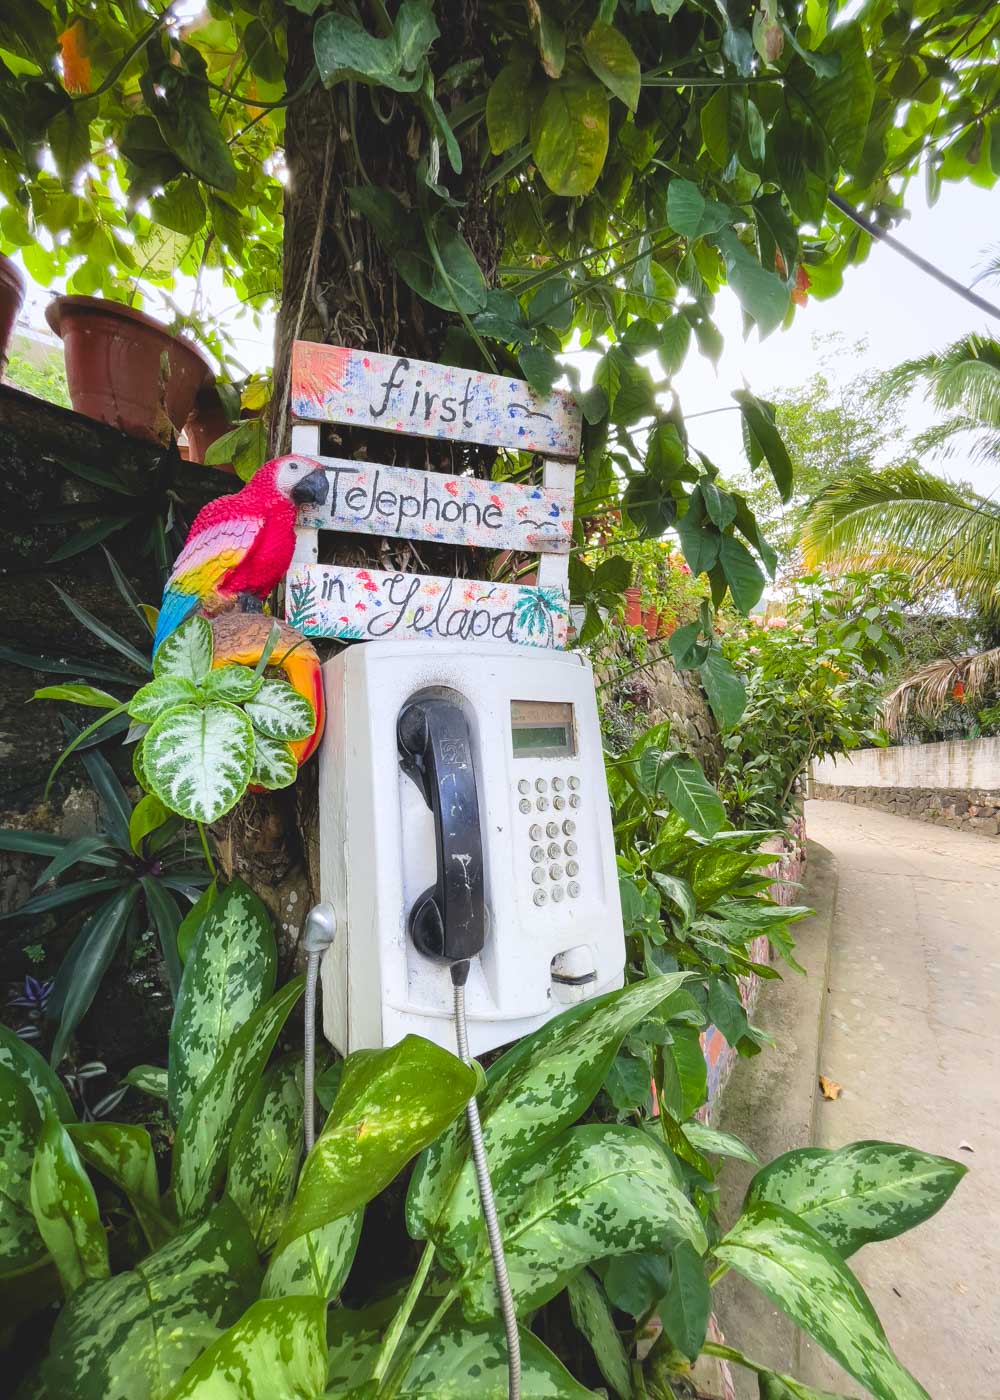 An antique looking payphone with a sign saying that it's the "first telephone in Yelapa"... and a parrot.